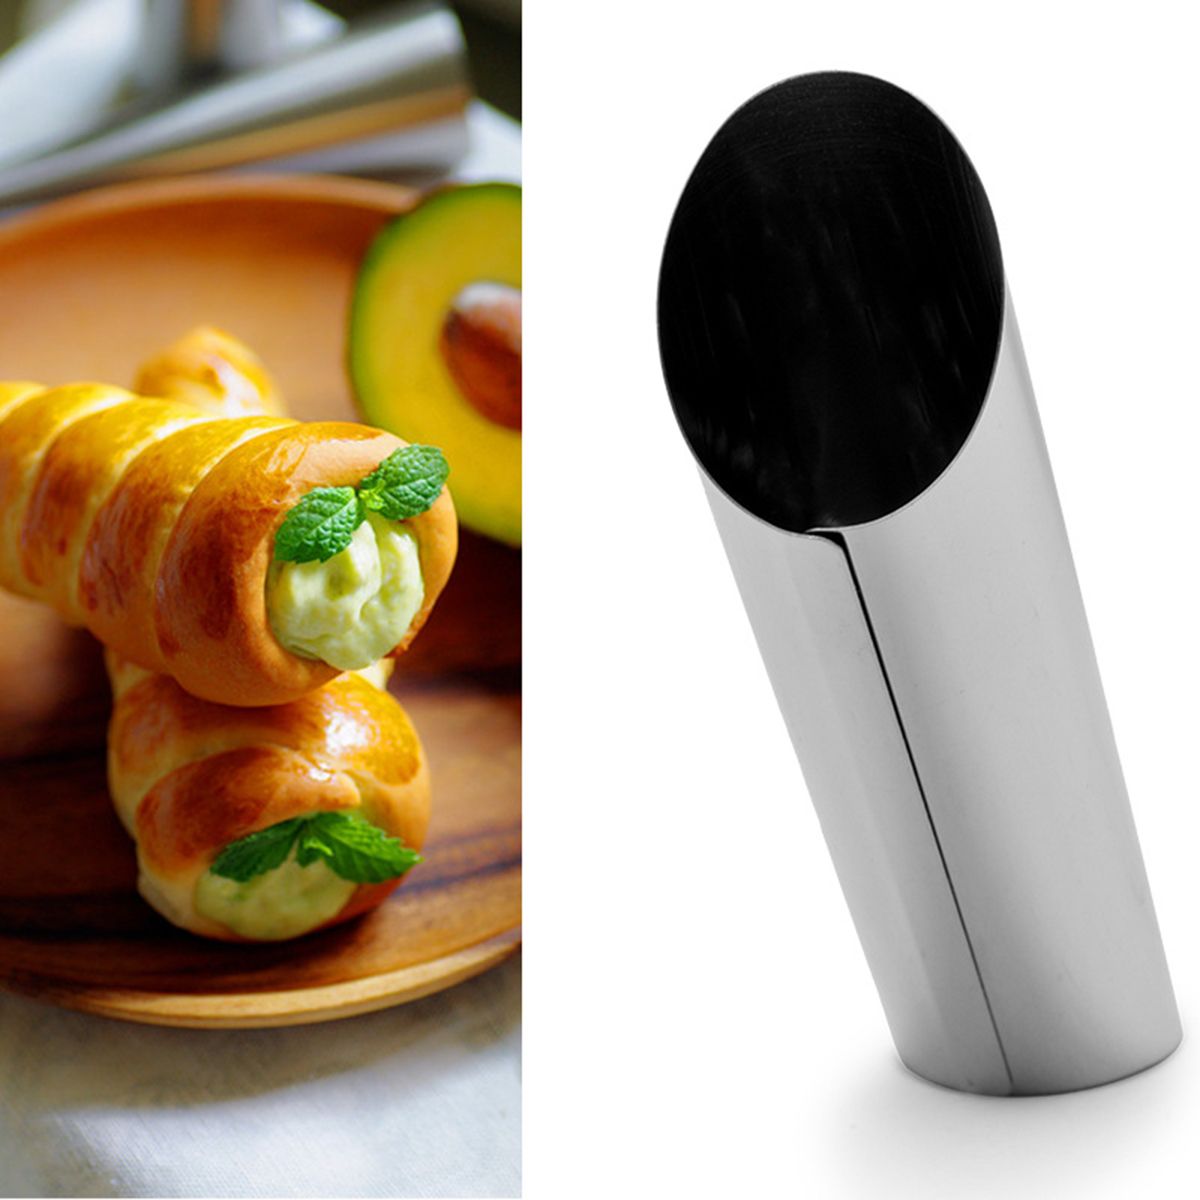 Stainless-Steel-Cylinder-Shape-Mold-Croissant-Roll-Bread-Baking-Tool-1611653